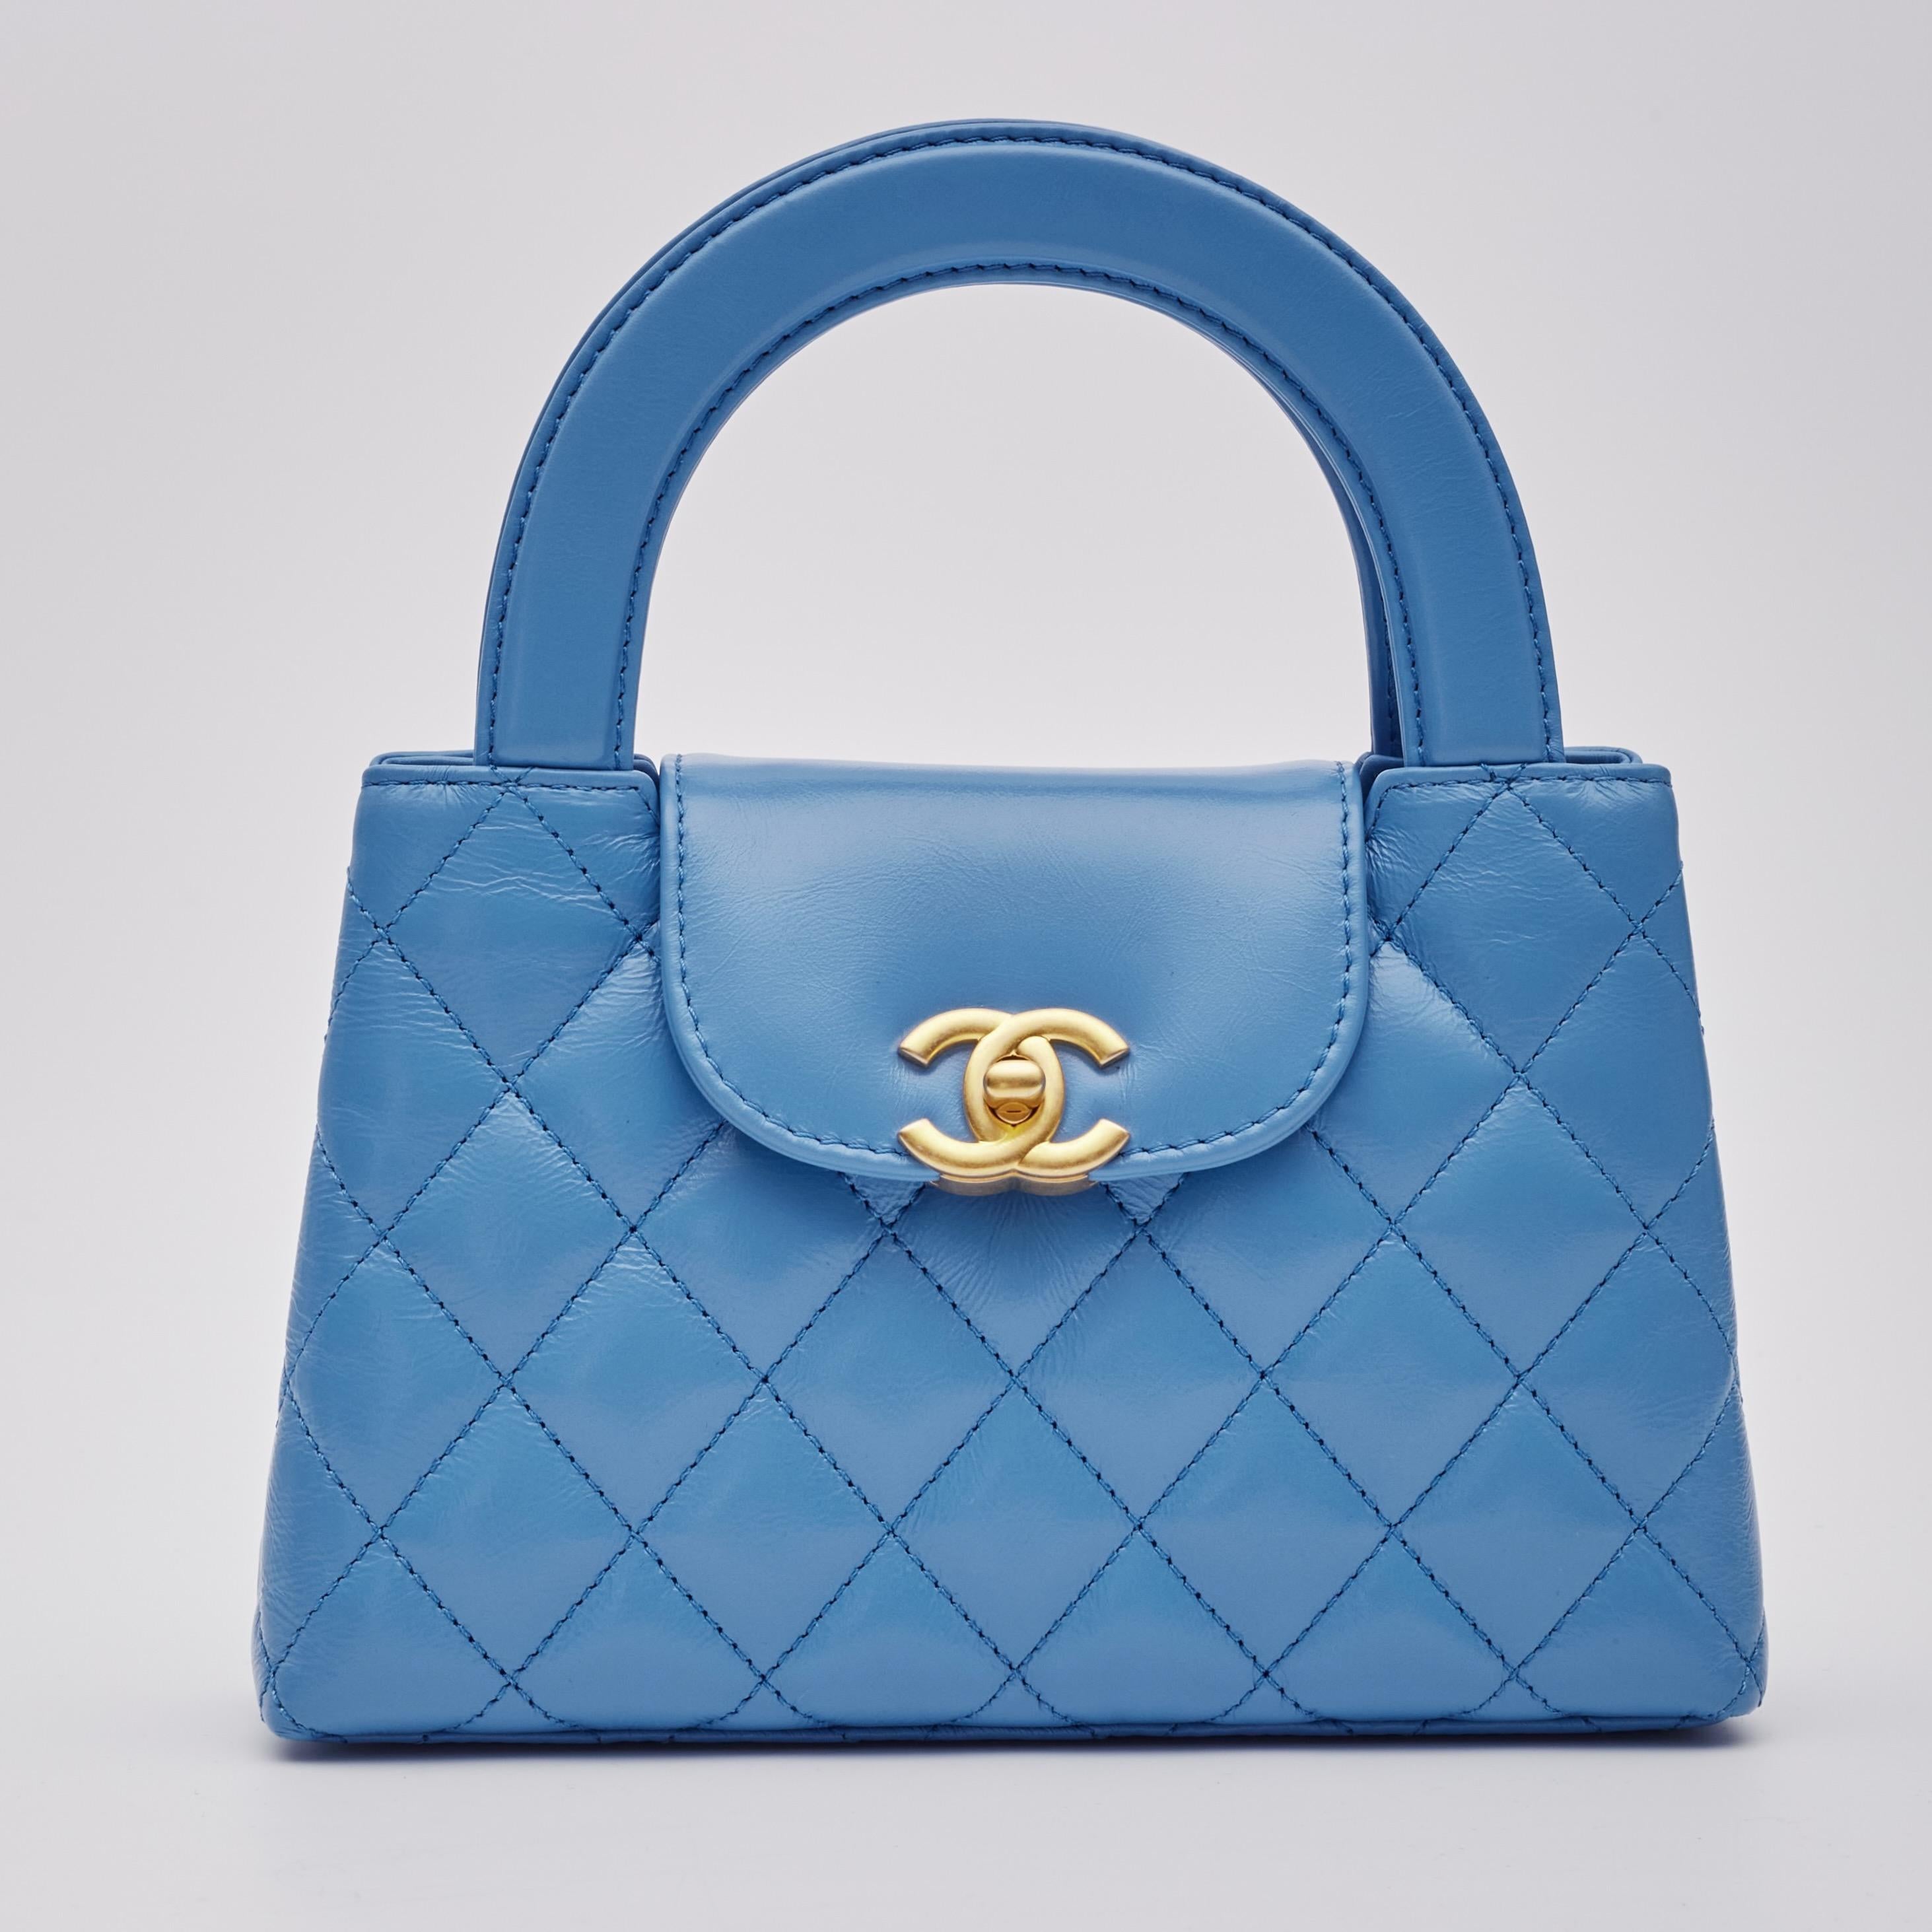 Chanel Blue Calfskin Mini Shopping Kelly Bag In New Condition For Sale In Montreal, Quebec